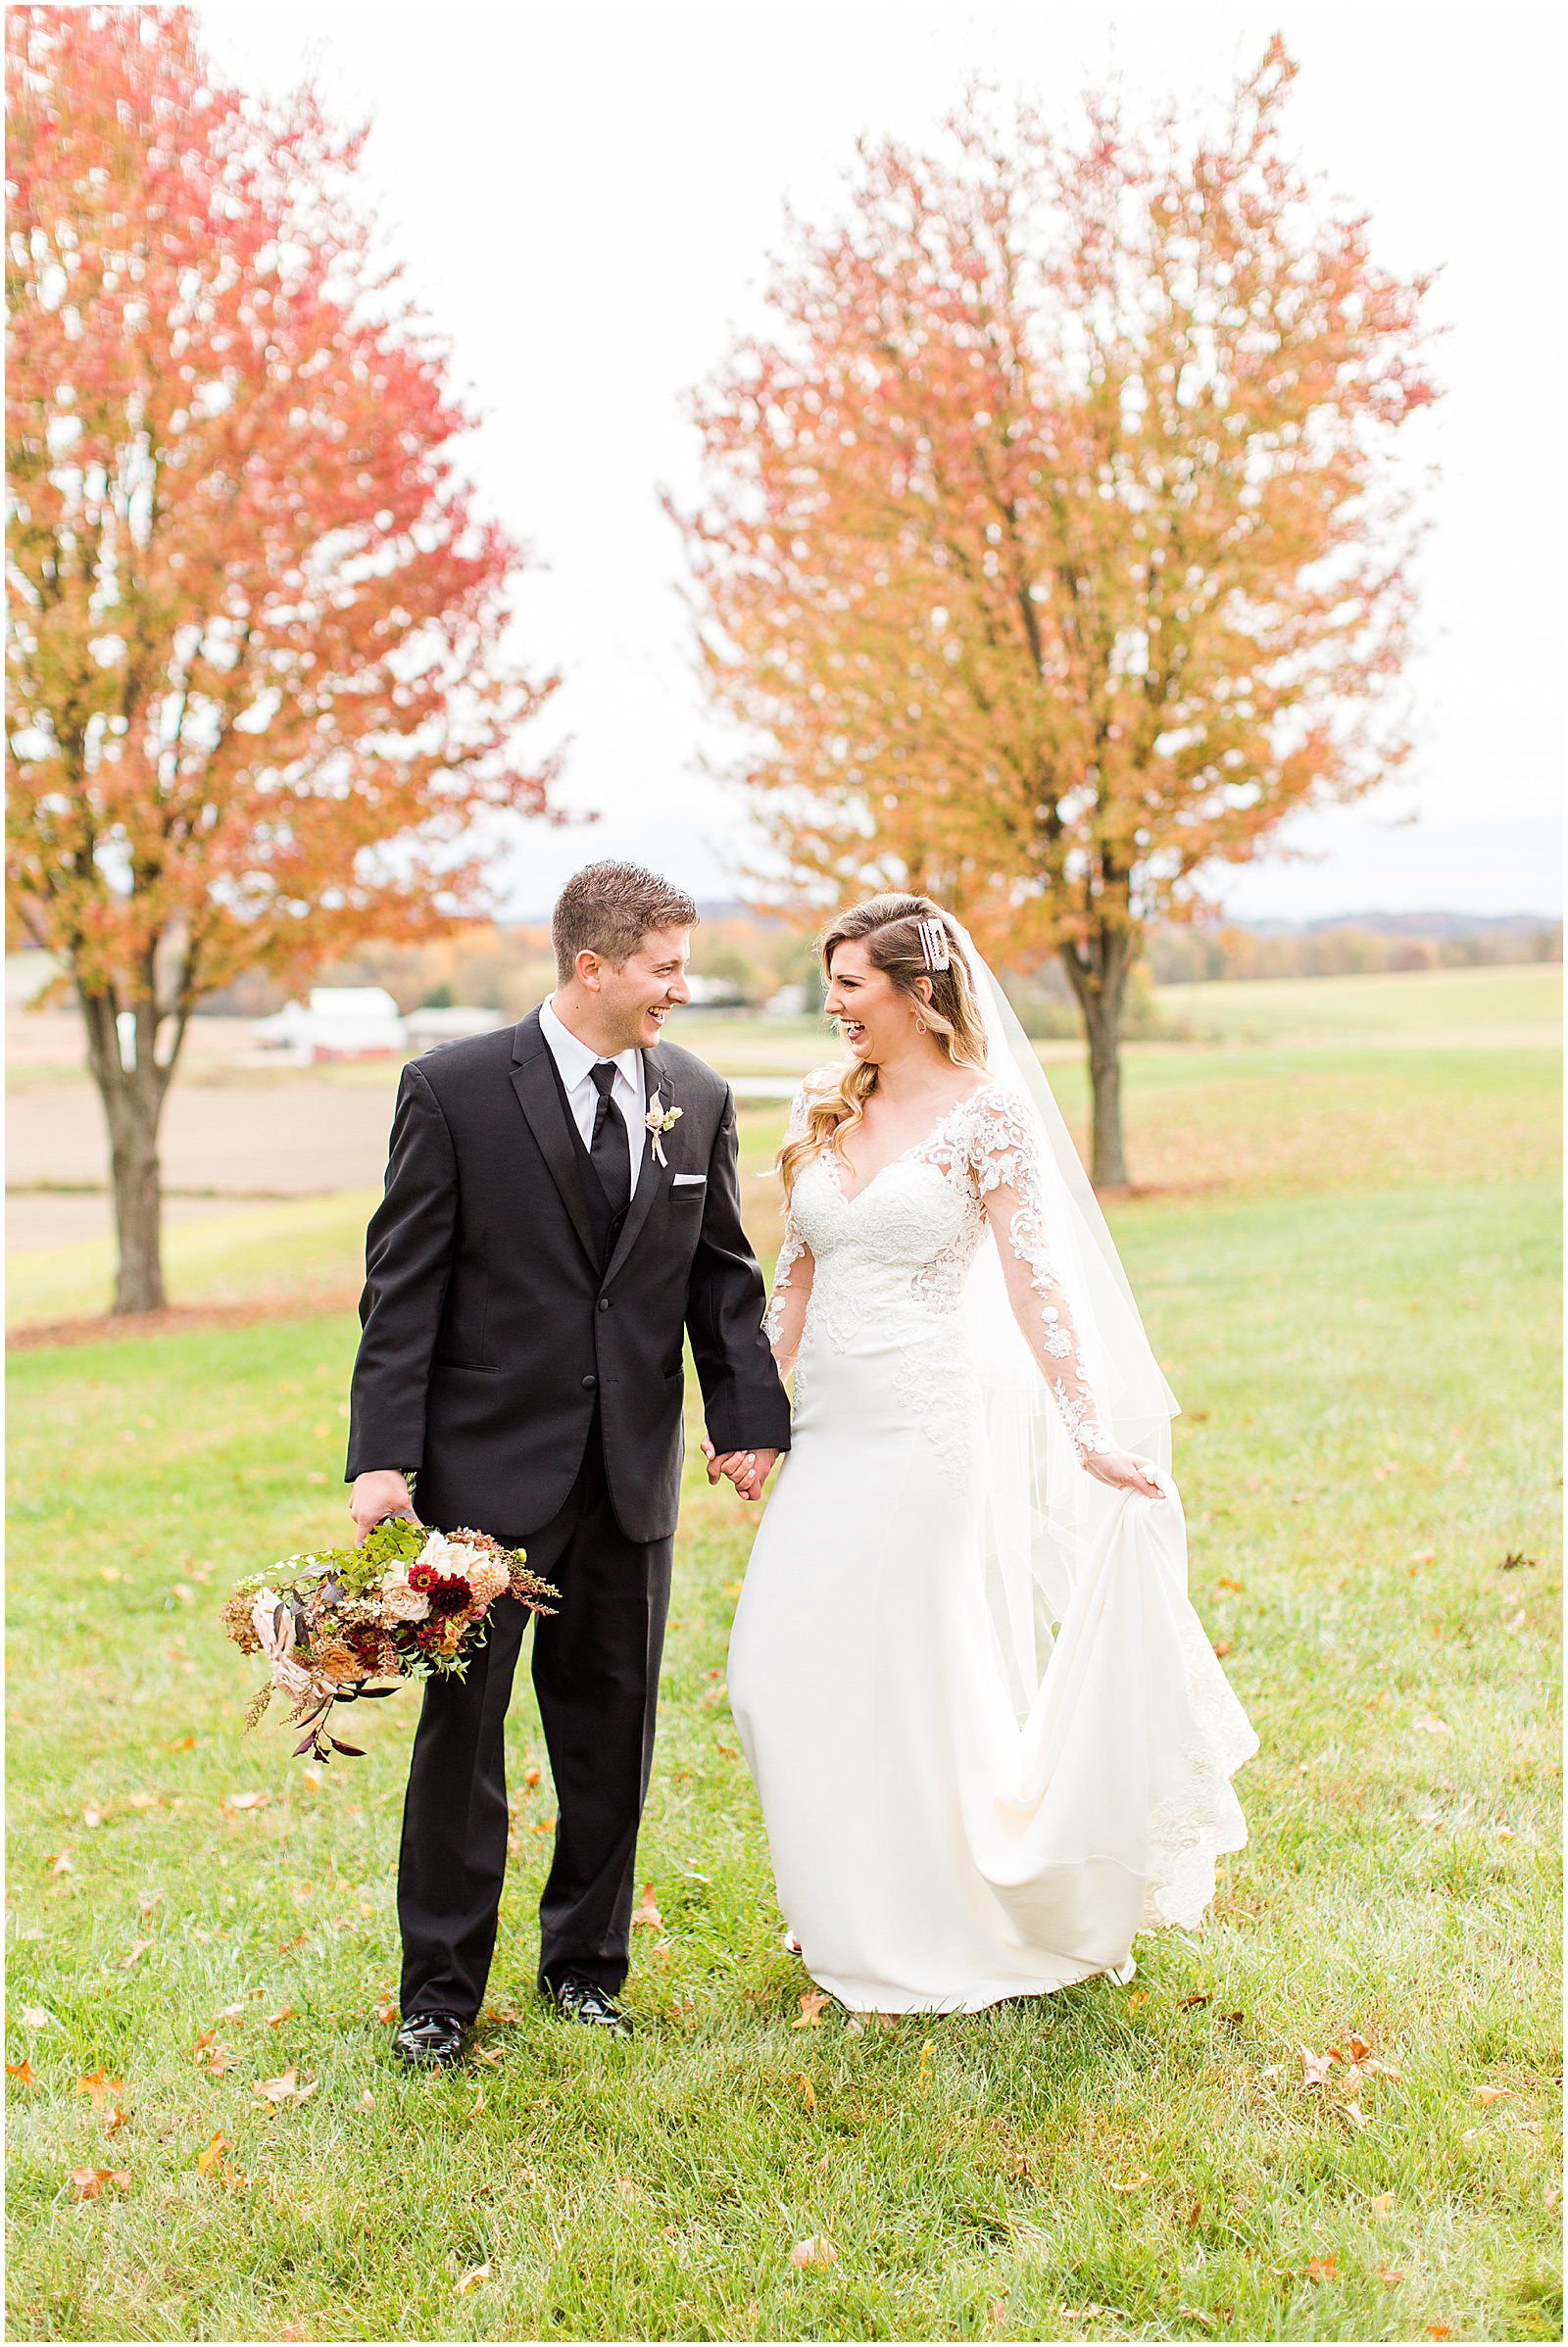 A Romantic Fall Wedding in Ferdinand, IN | Tori and Kyle | Bret and Brandie Photography 0065.jpg